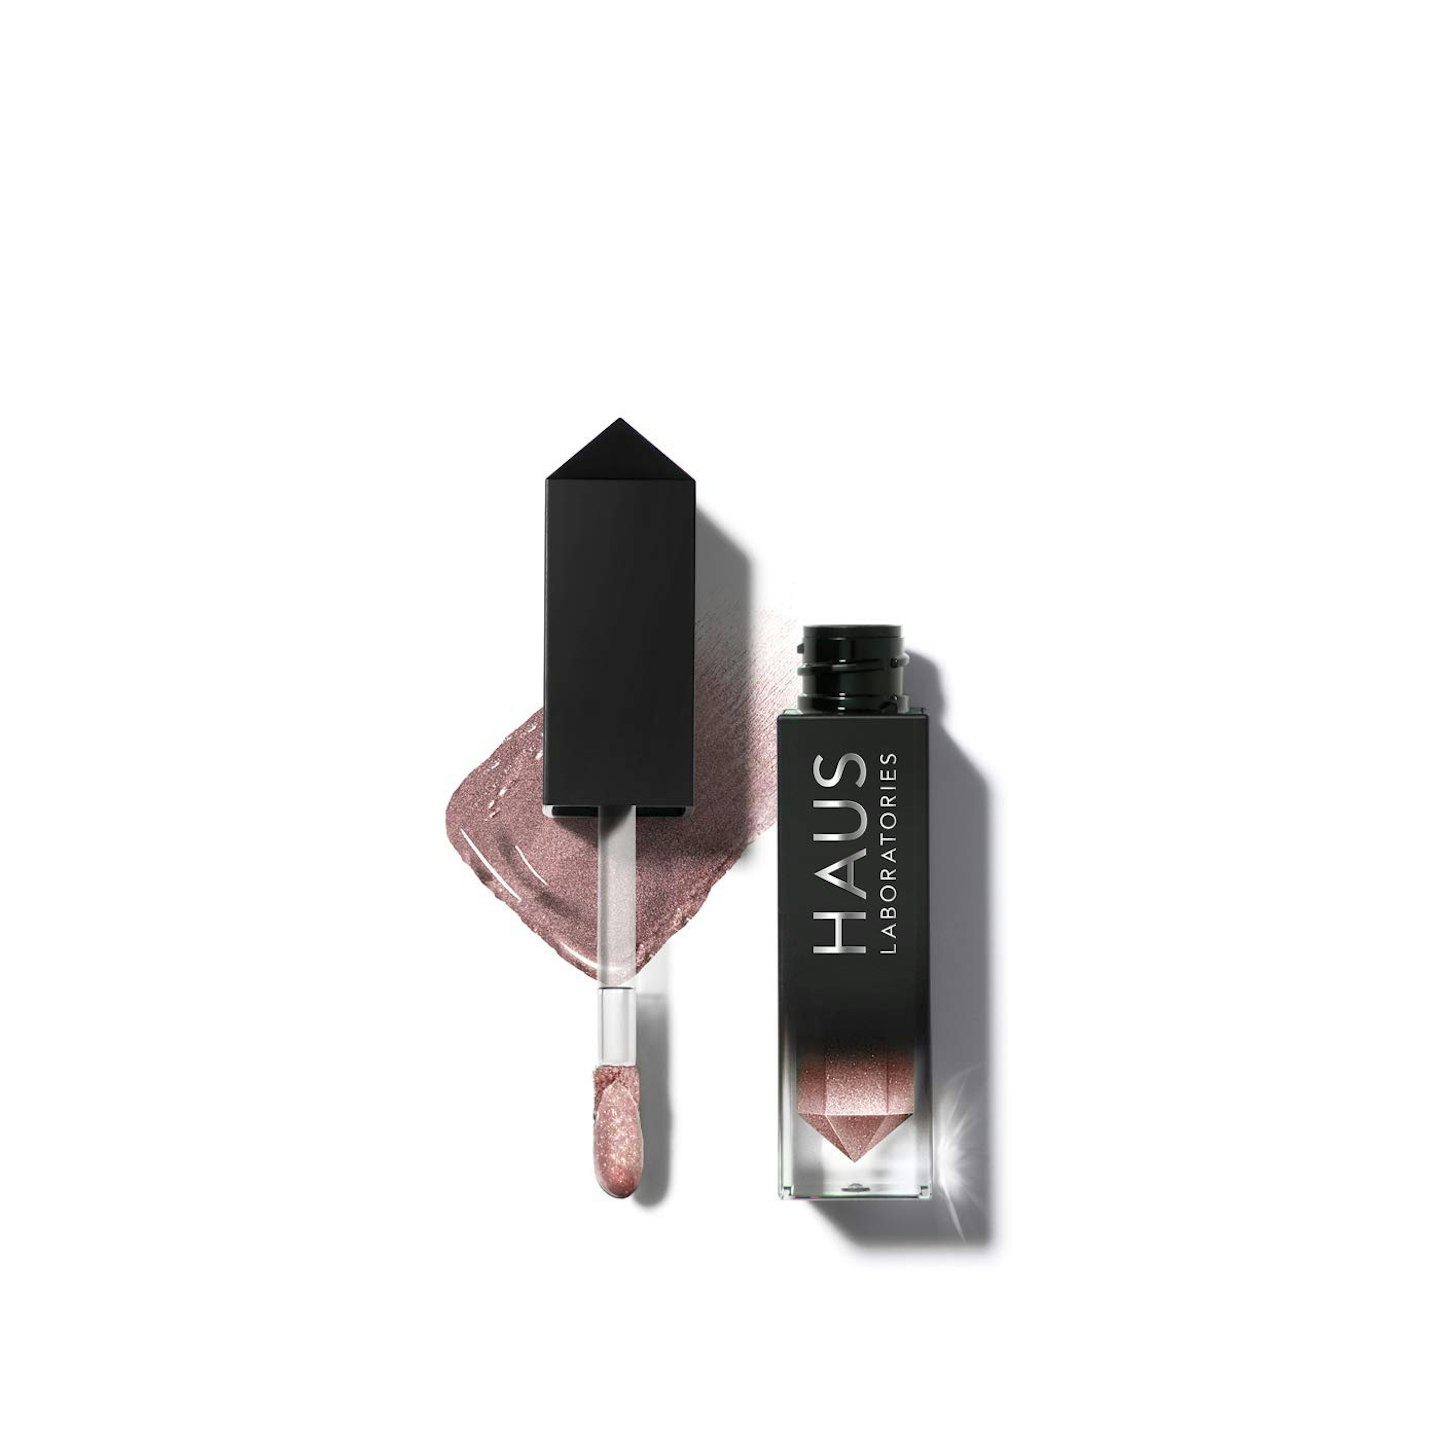 Glam Attack Liquid Eyeshadow by Haus Labs